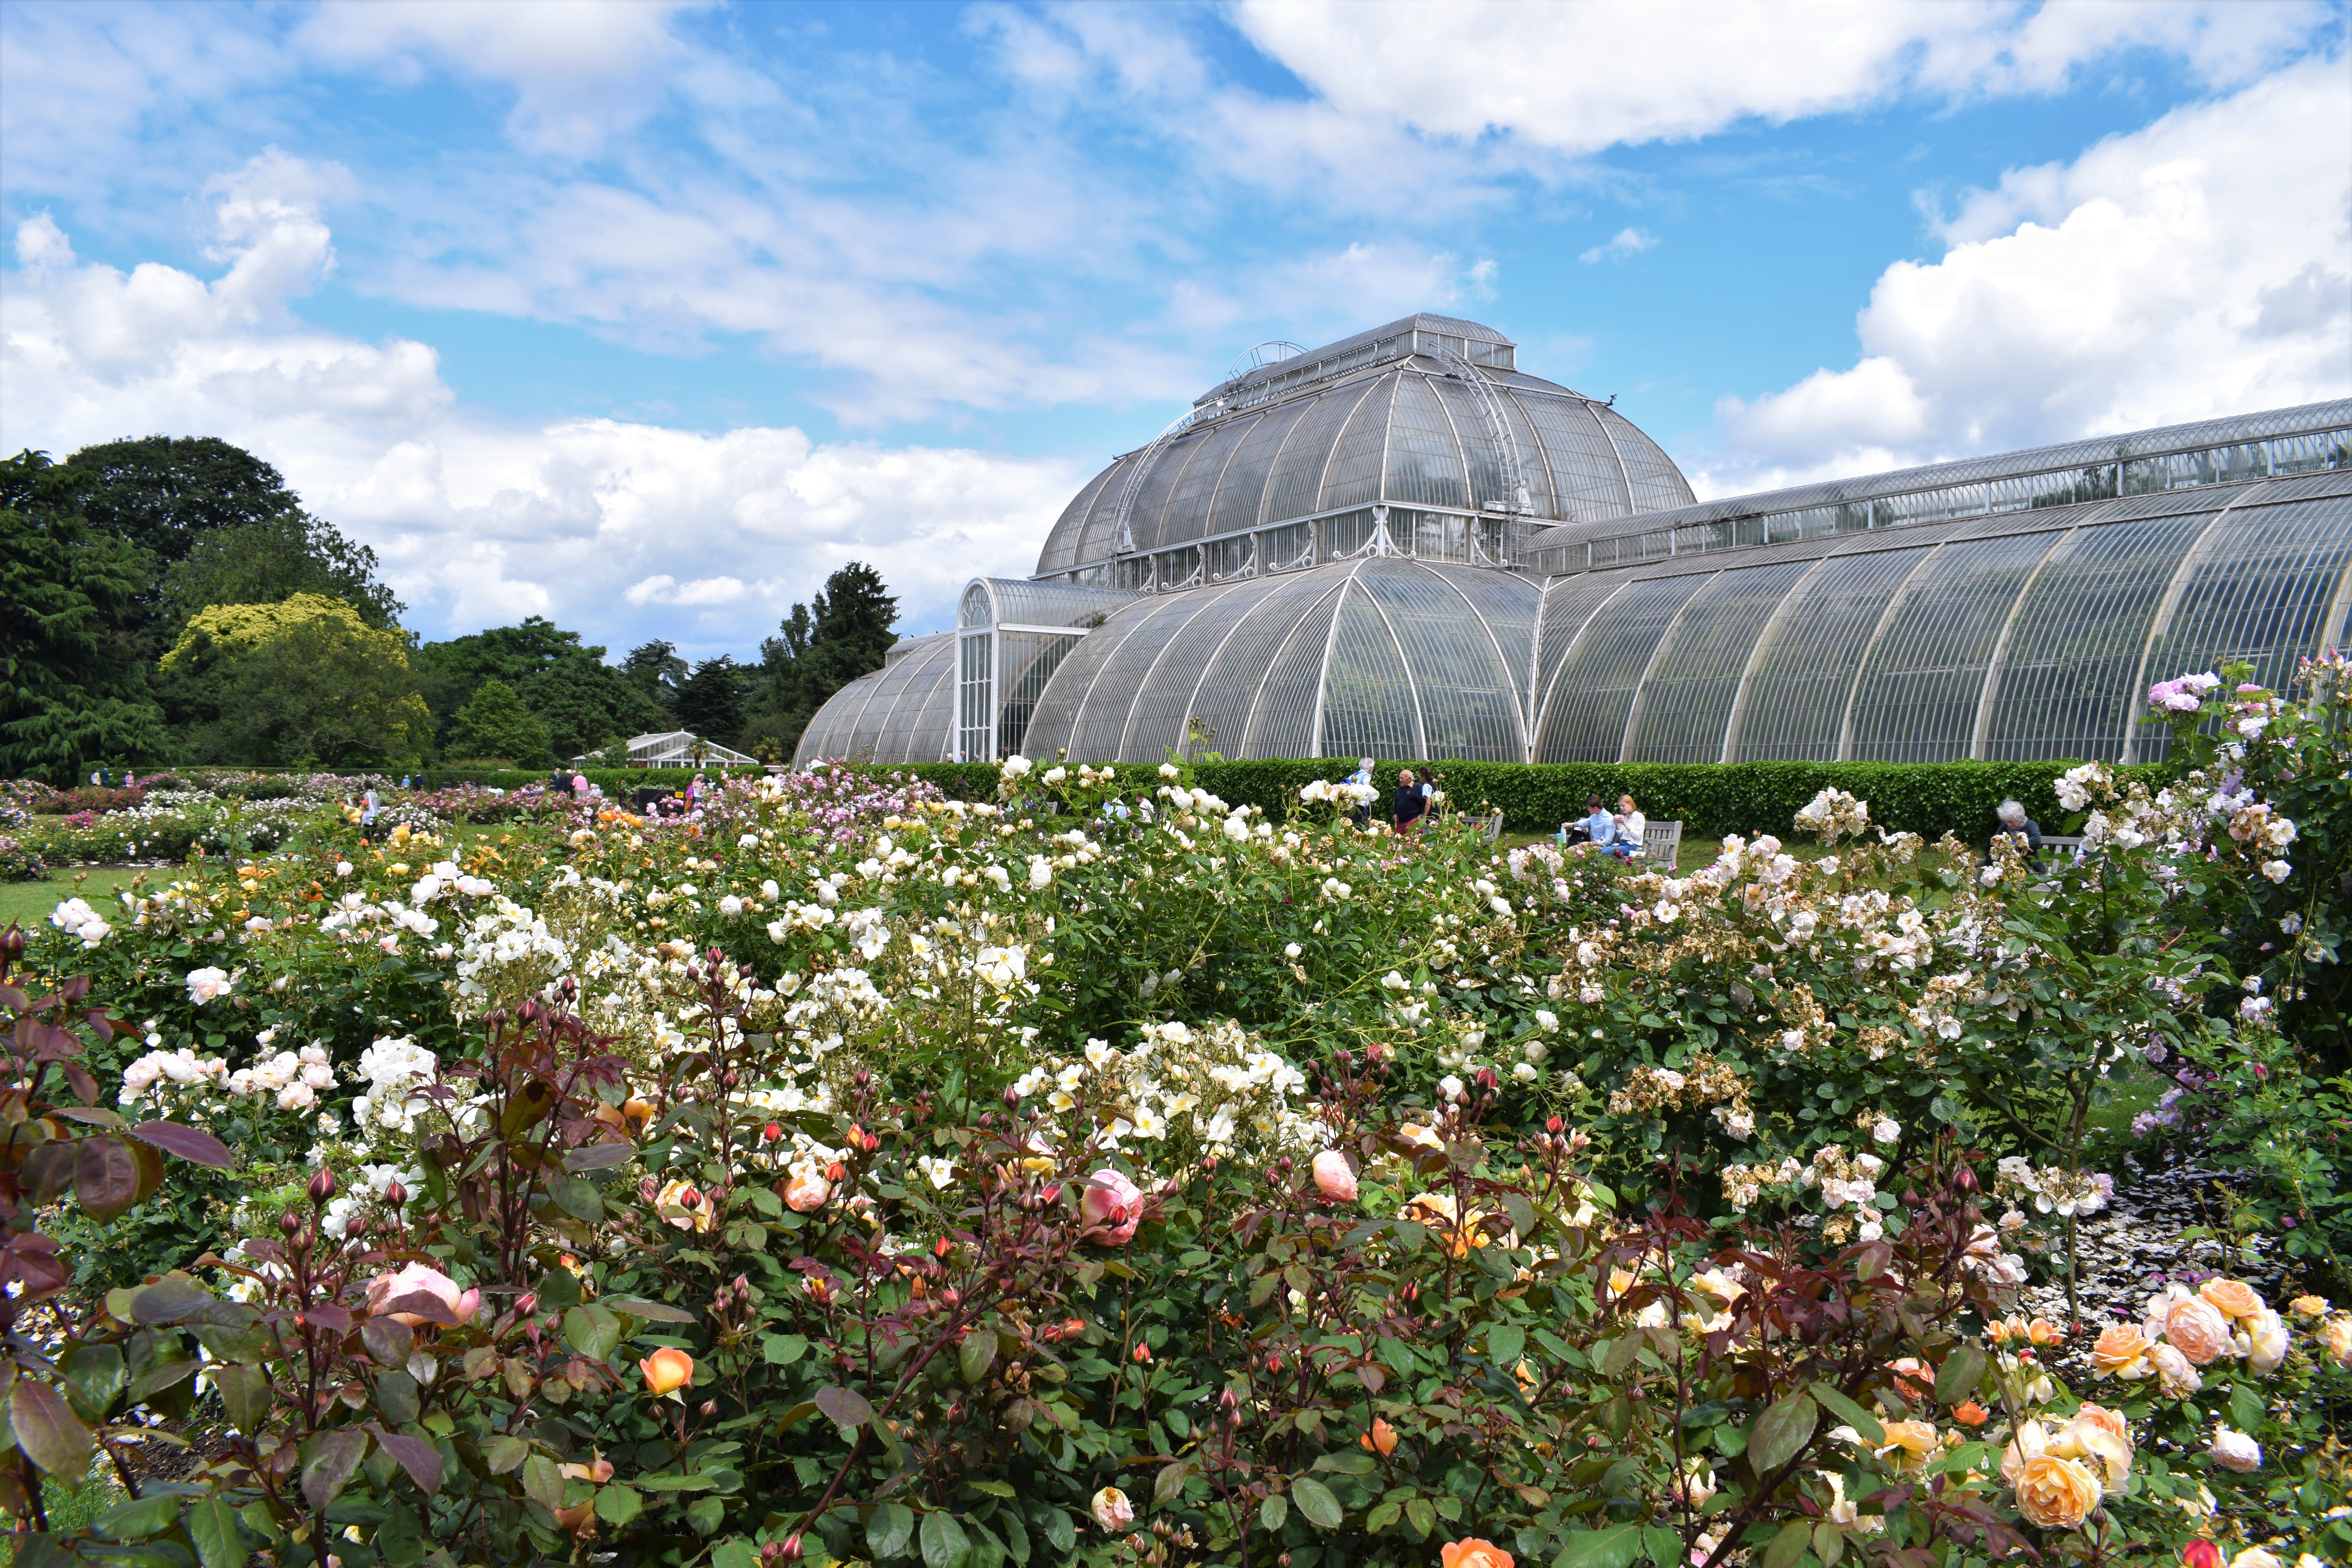 Several colourful roses growing in front of a large glasshouse